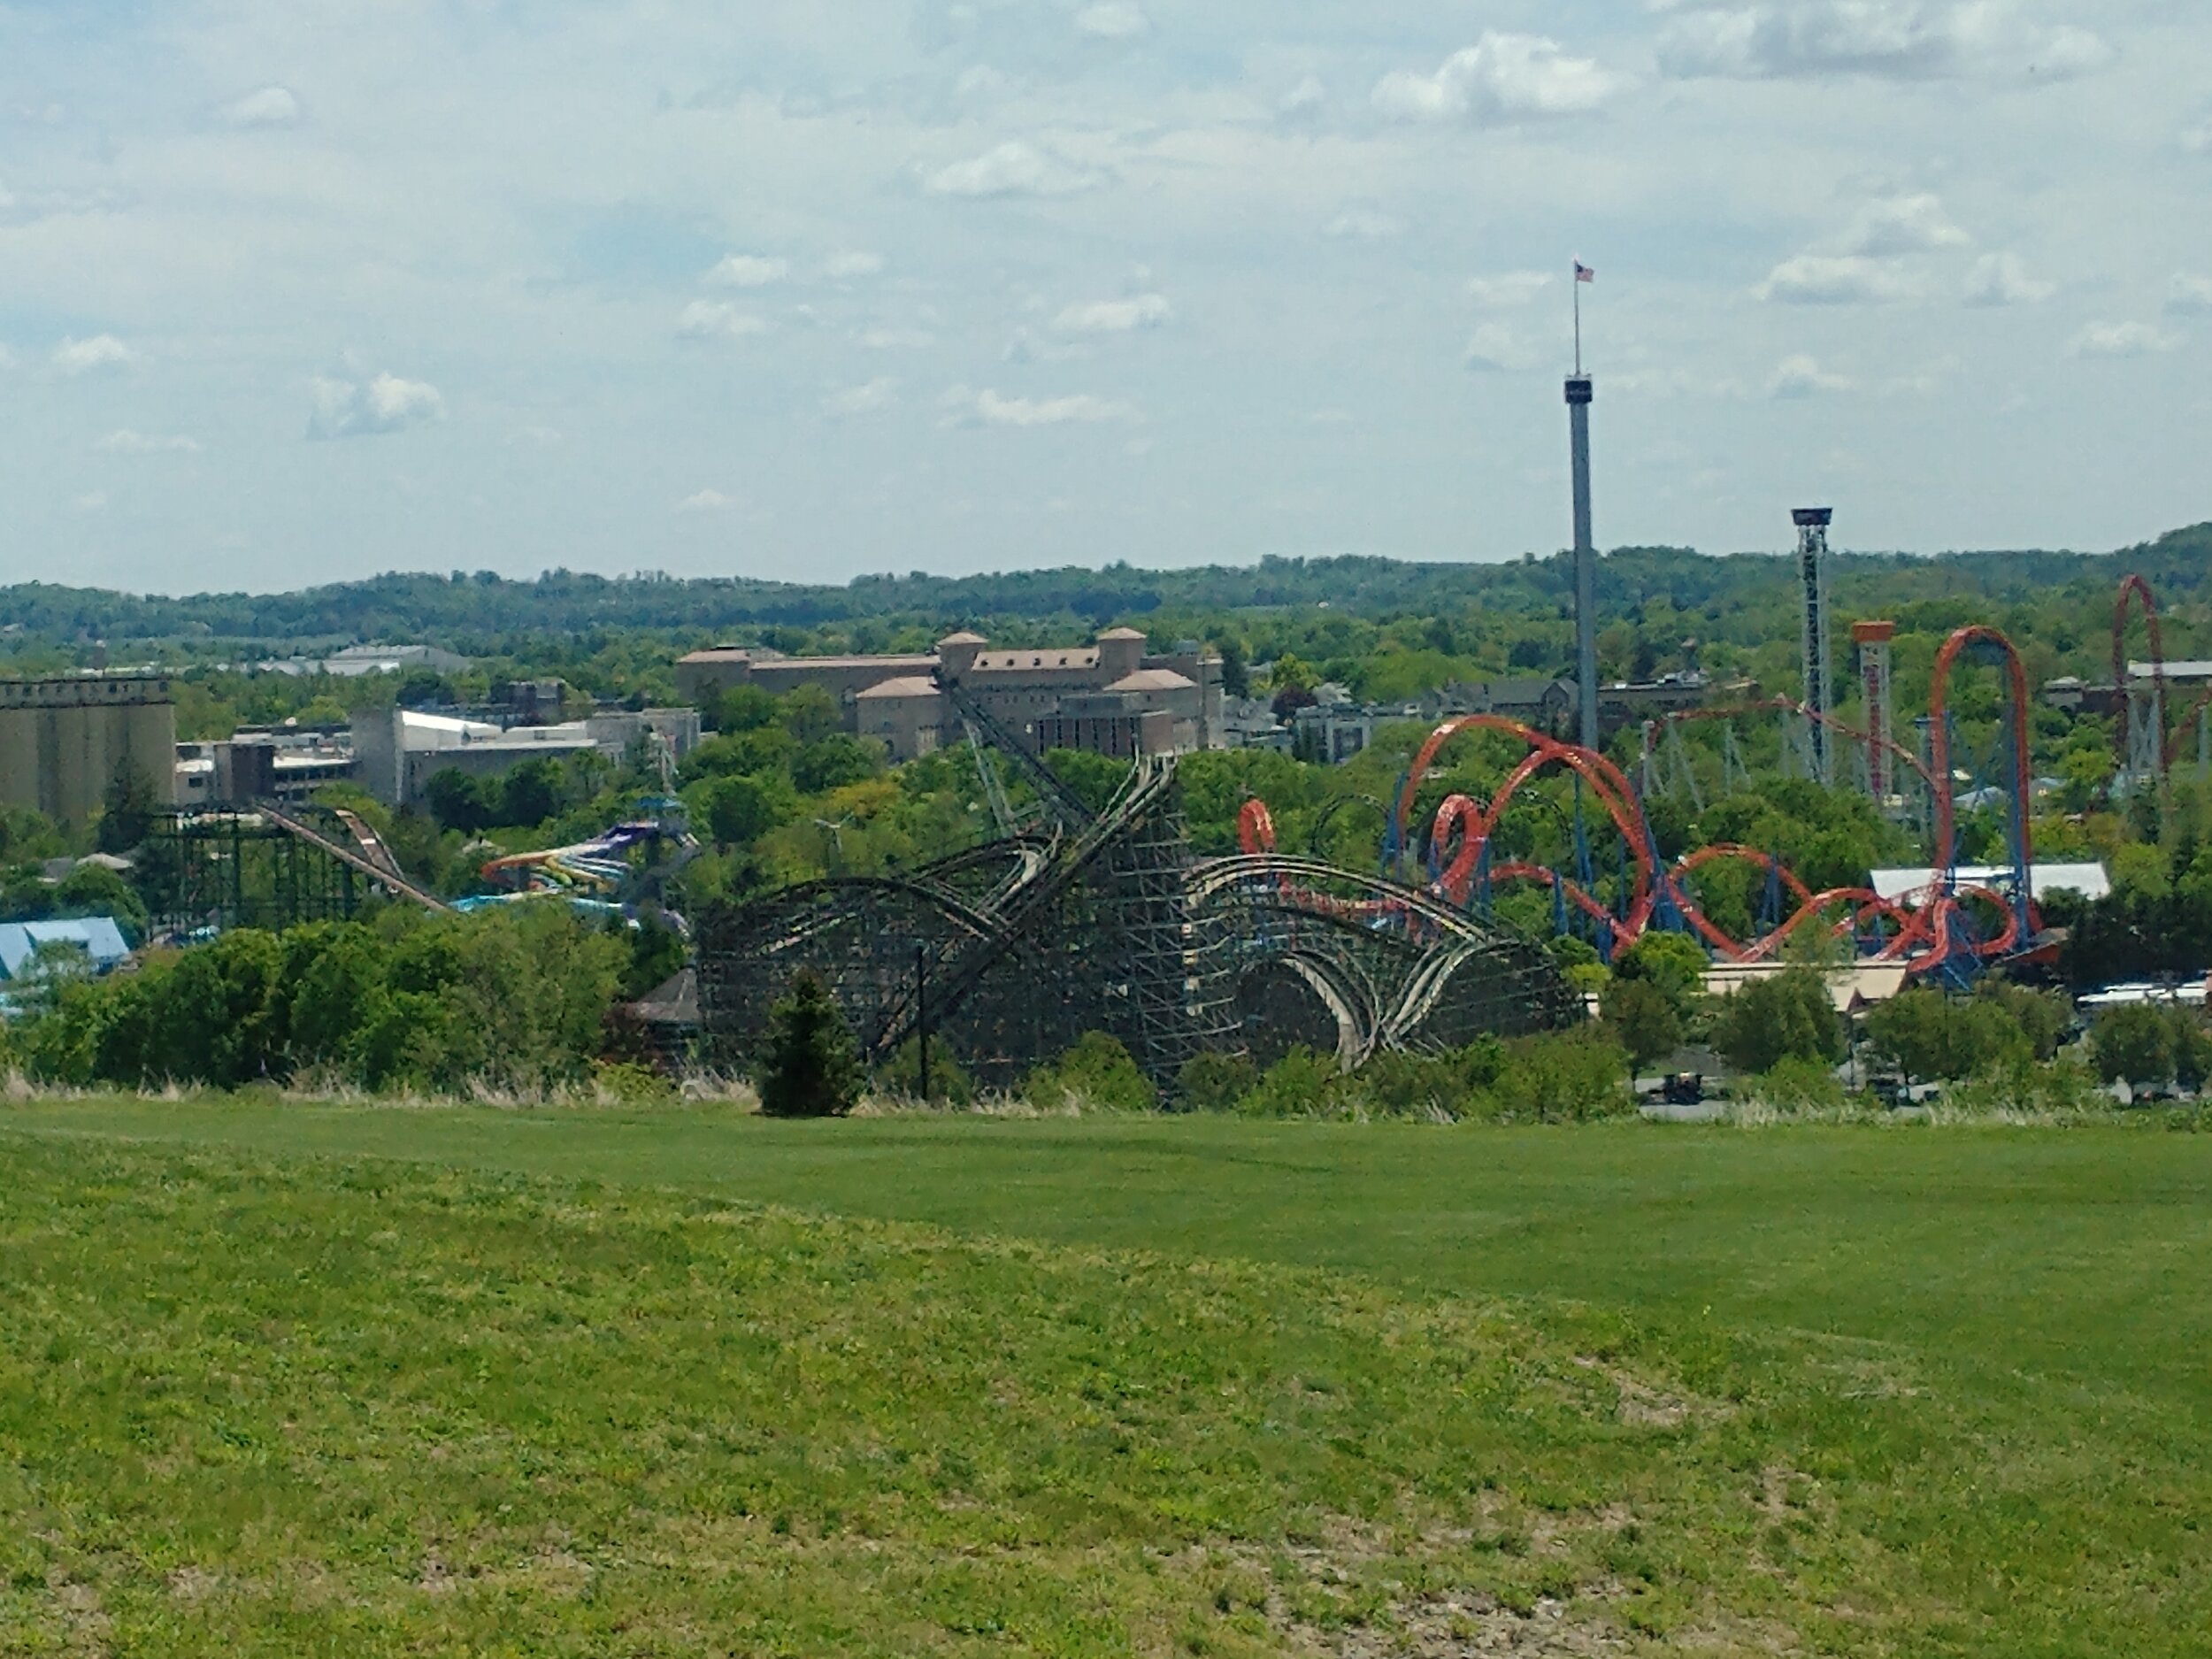 A view of some of Hershey Park’s many roller coasters.